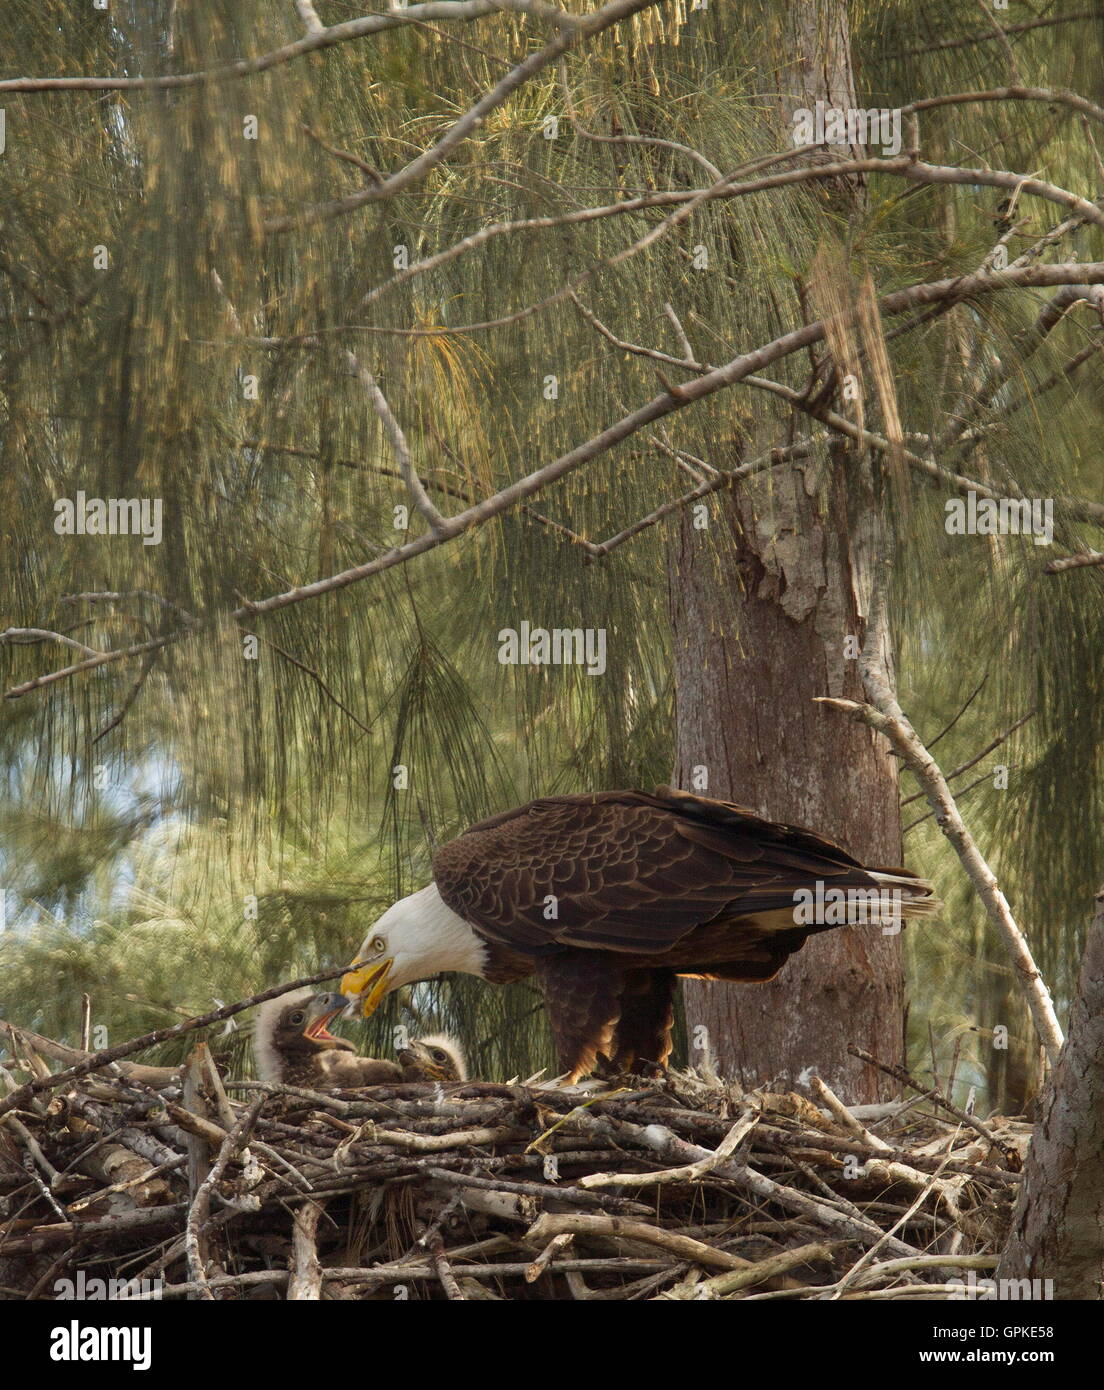 Pembroke Pines, Florida, USA. 8th Sep, 2016. A mature bald eagle feeds the young chicks in their nest. The bald eagles were born in mid January. The adult bald eagles have lived in their nest since 2008. © J Pat Carter/ZUMA Wire/Alamy Live News Stock Photo